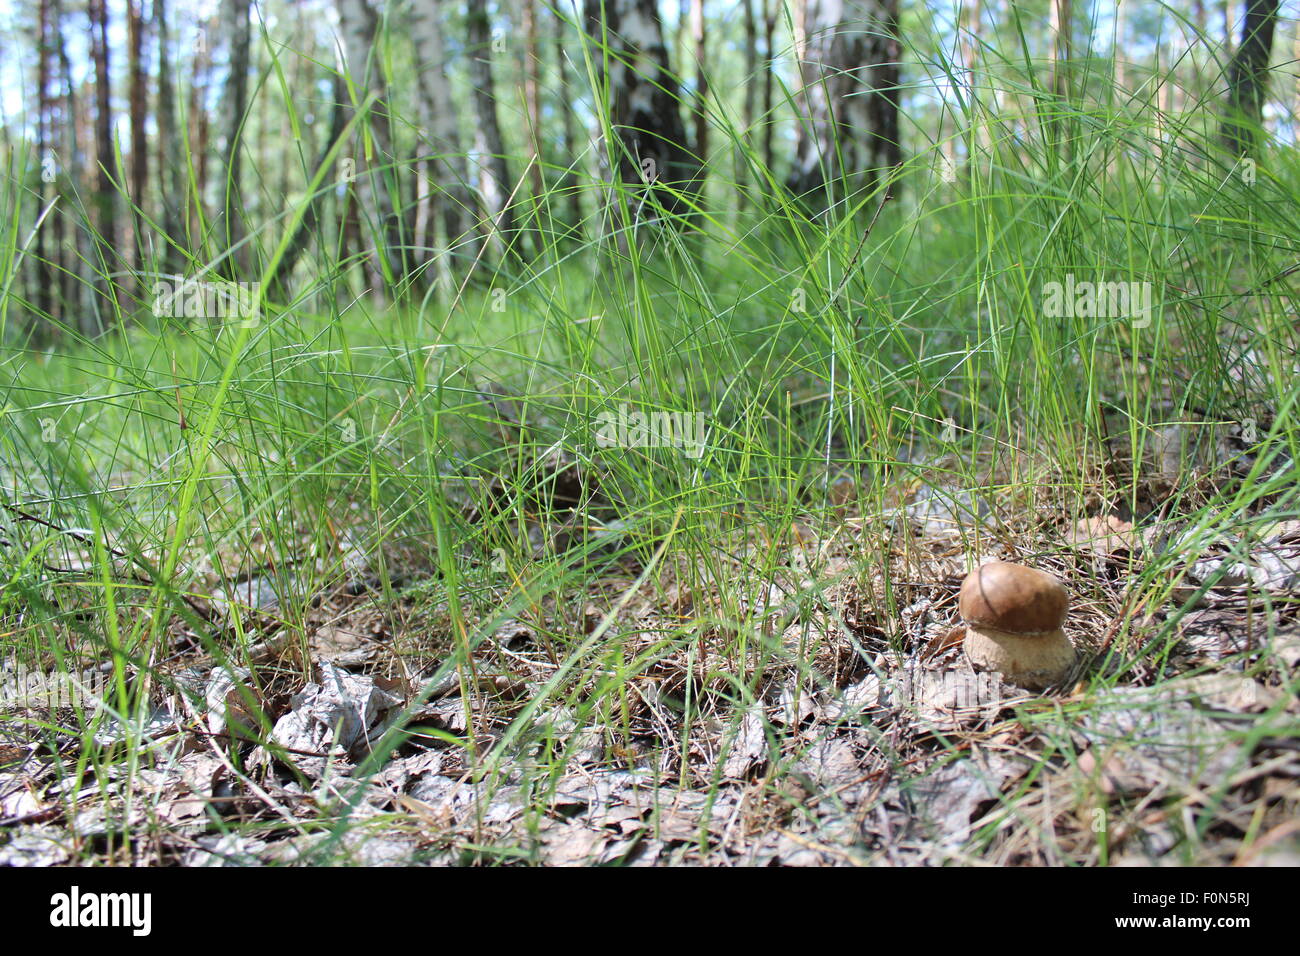 image of beautiful and small cep in the grass Stock Photo